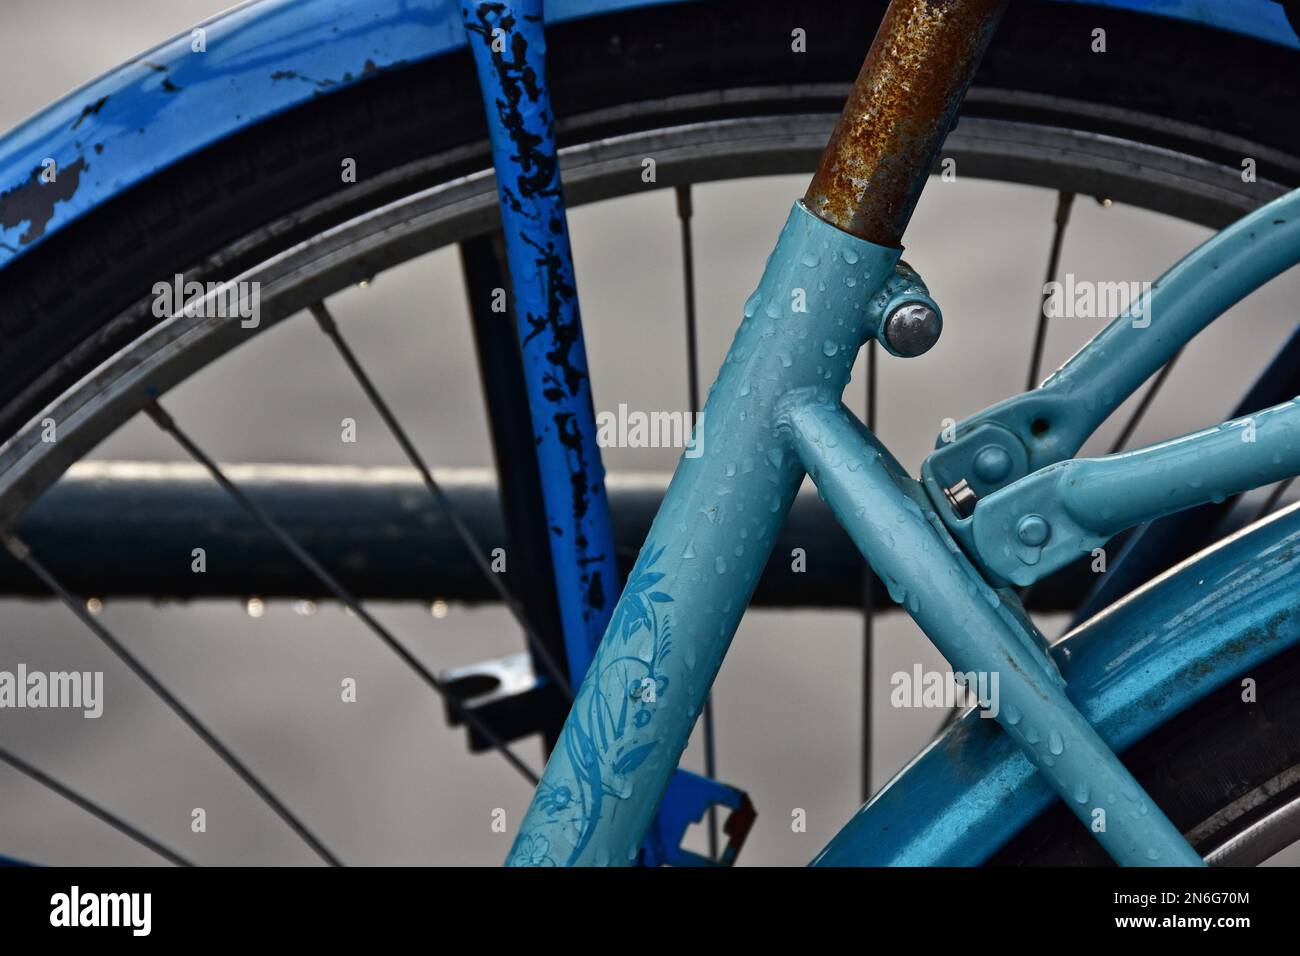 Light blue bicycle frame in the rain, raindrops on bicycle, frame of bicycle, Amsterdam, Netherlands Stock Photo